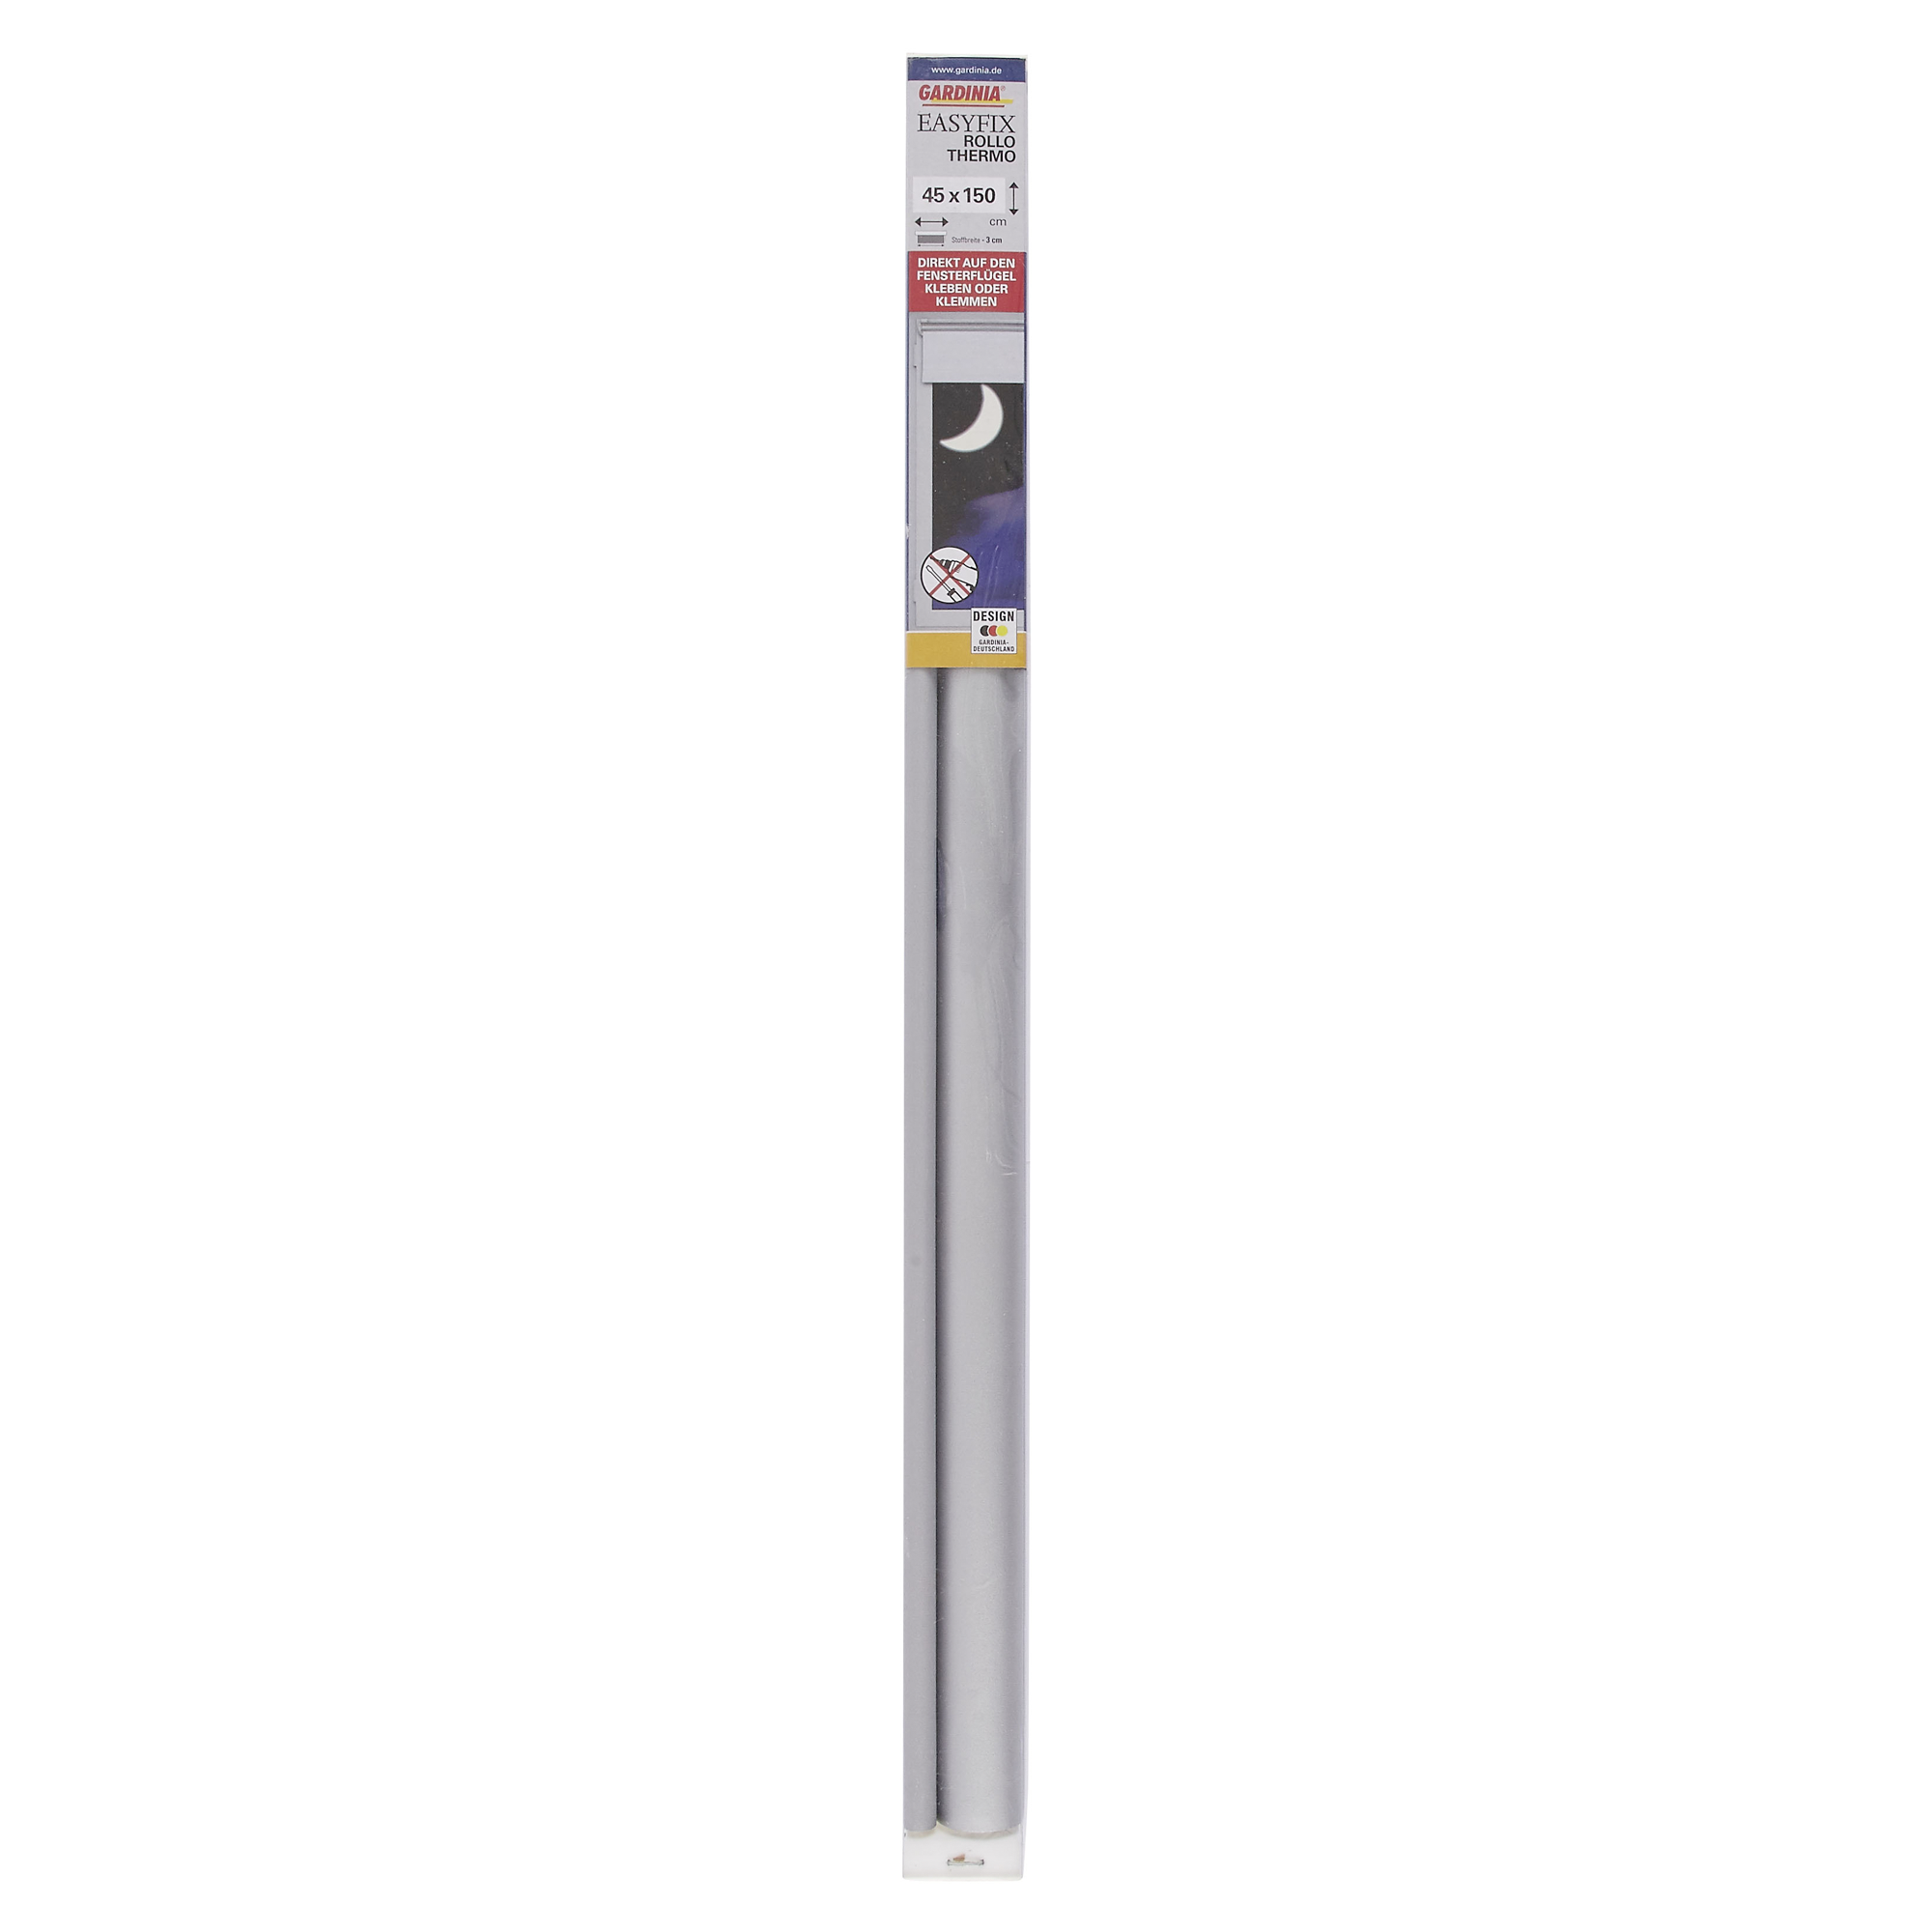 EasyFix Rollo 'Thermo energiesparend' grau 45 x 150 cm + product picture